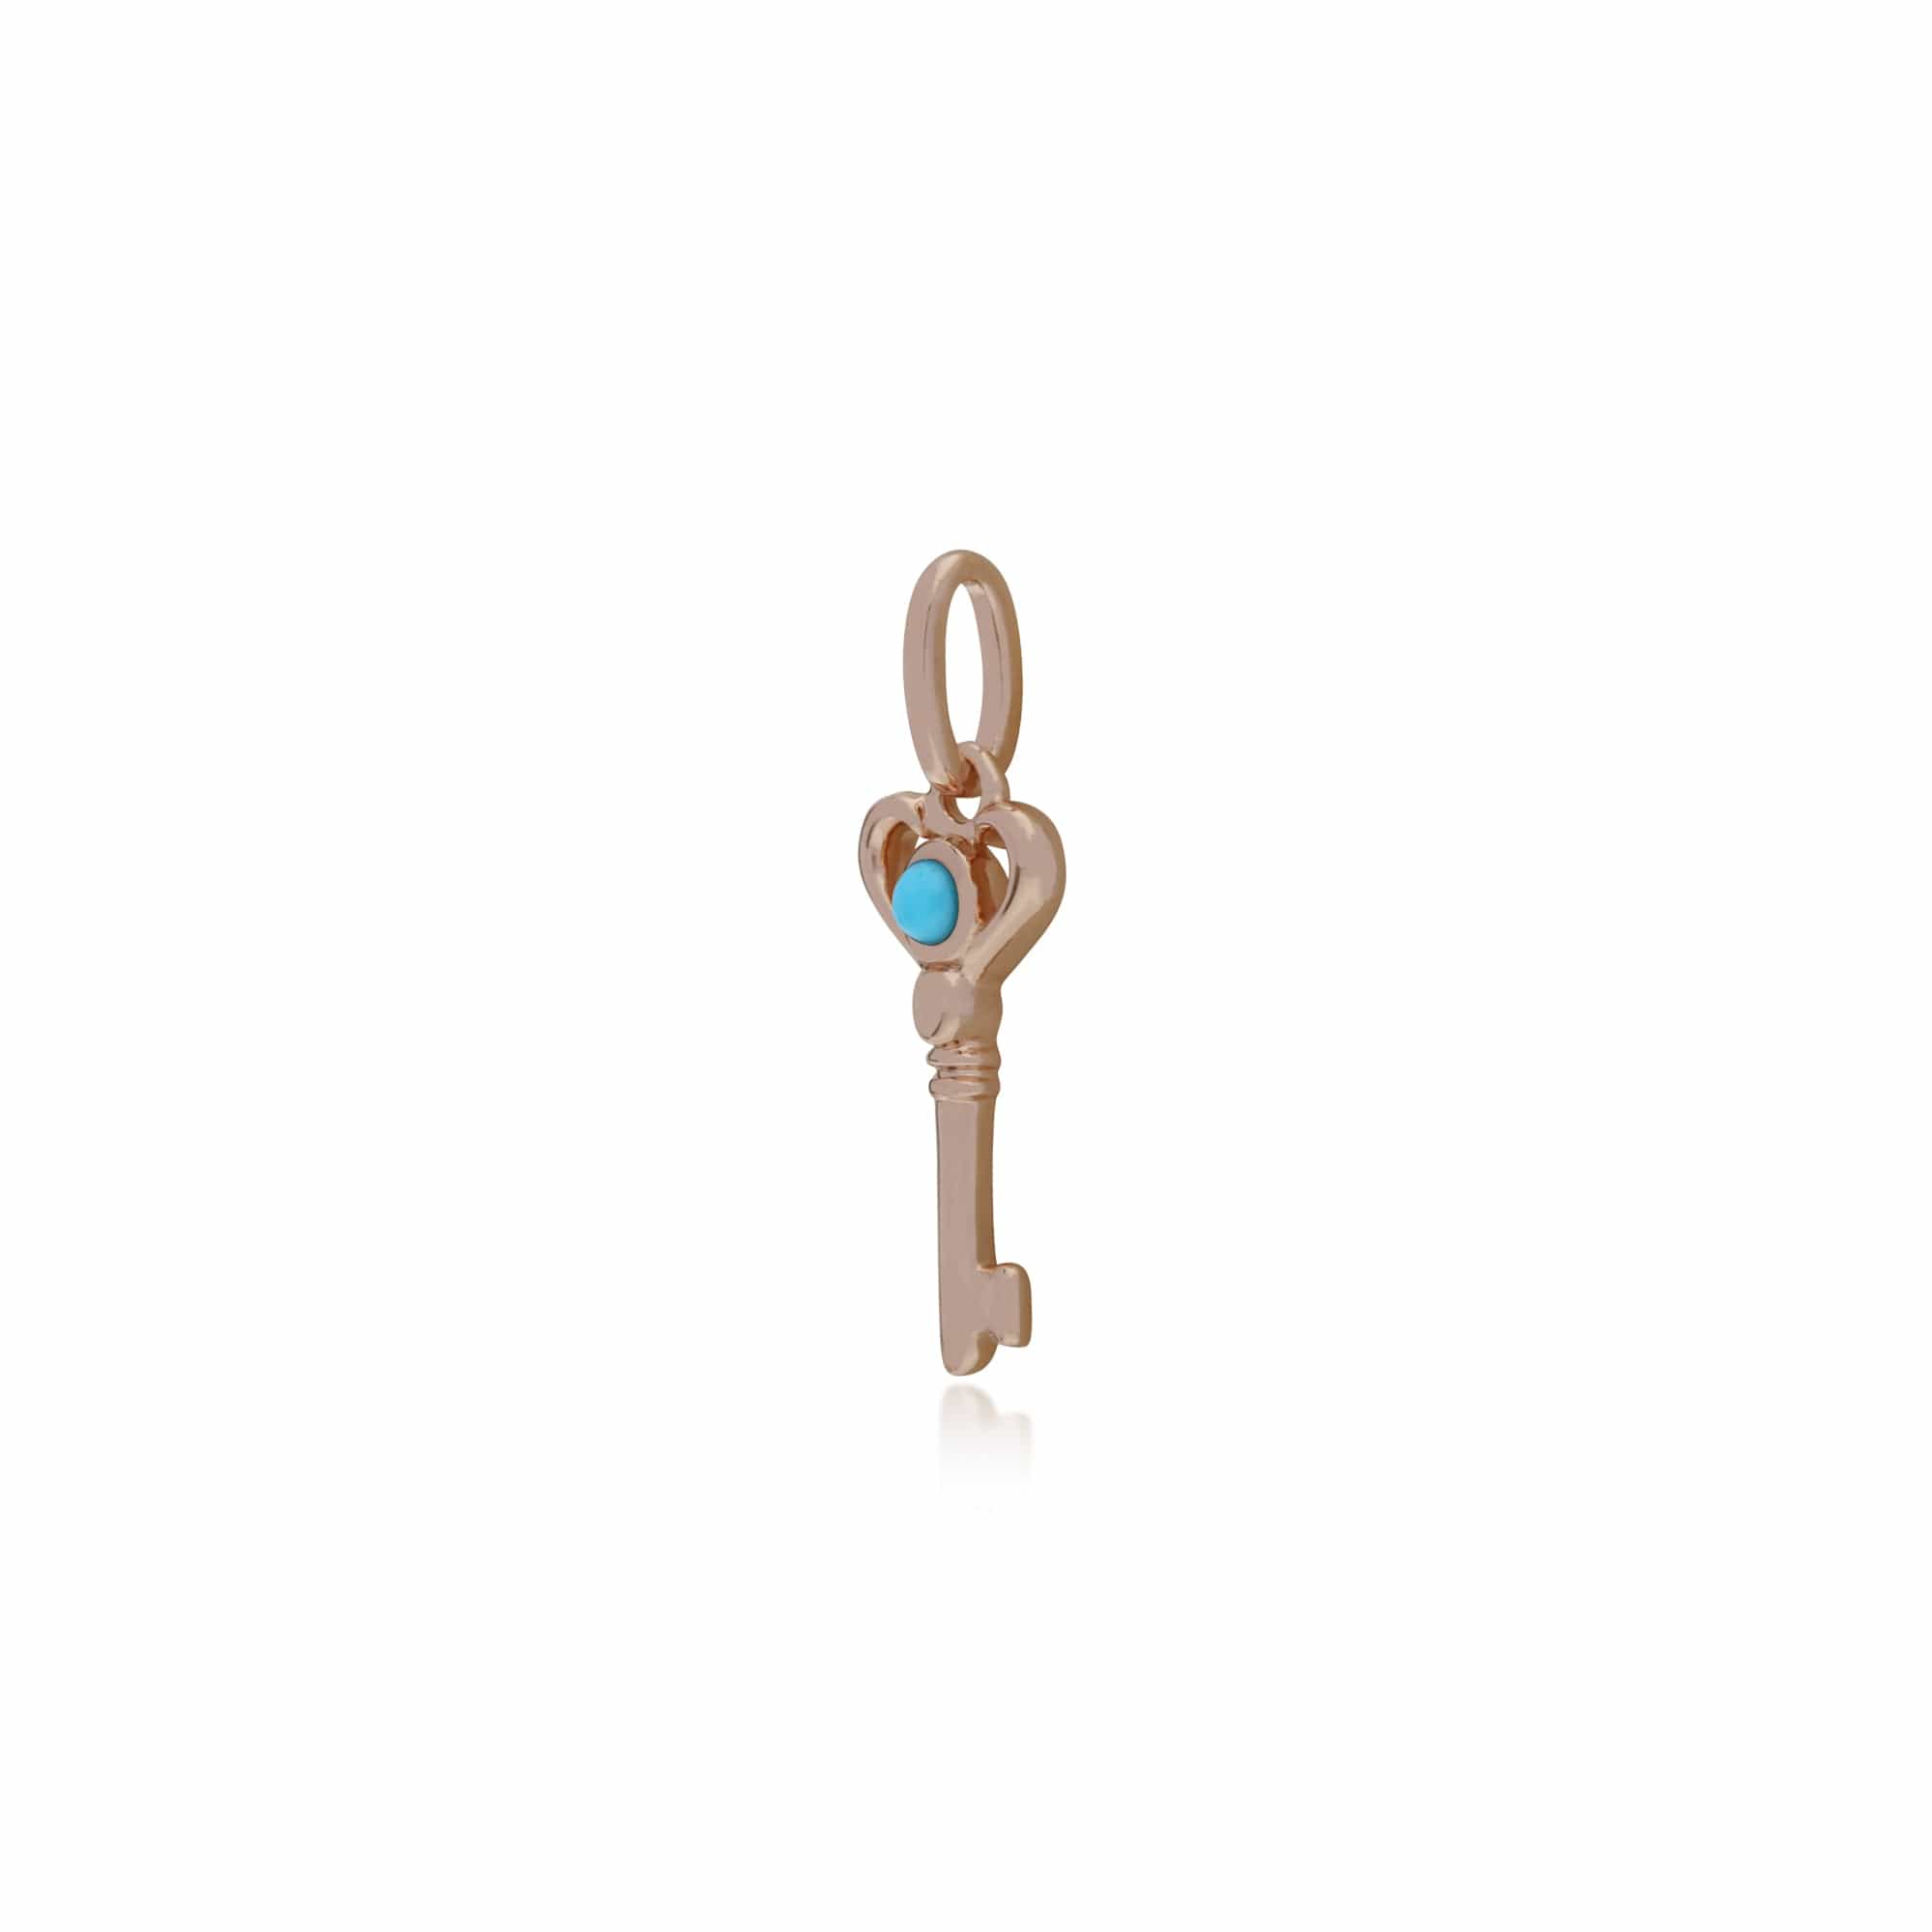 Gemondo Rose Gold Plated Sterling Silver Turquoise Small Key Charm - Gemondo